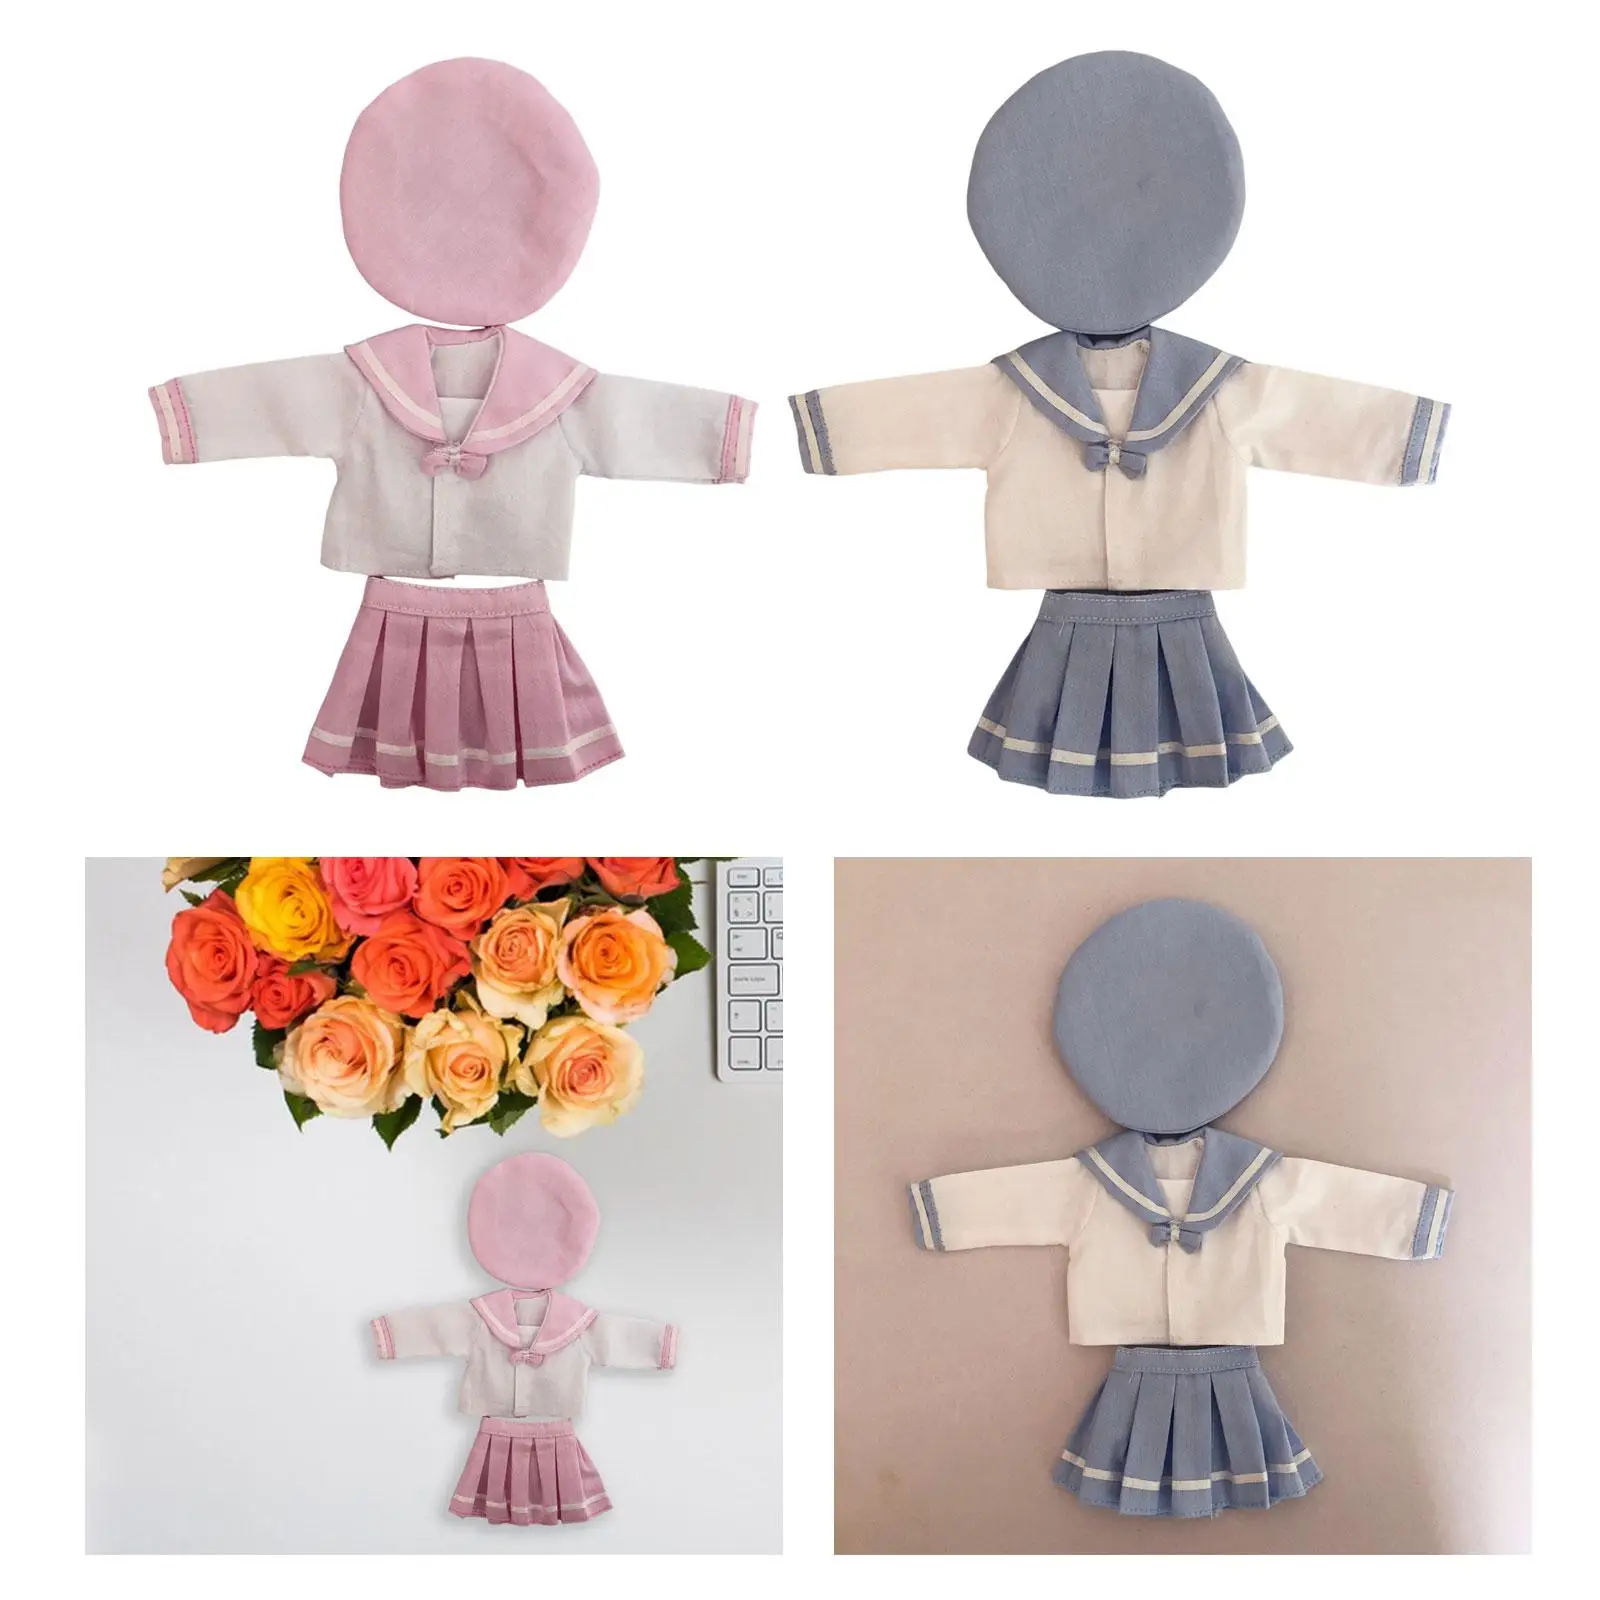 Doll Clothes Dress Set Daily Wear Clothing Uniforms Costume Pleated Skirt for 1/6 12inch Baby Doll Girl Toy Birthday Gift